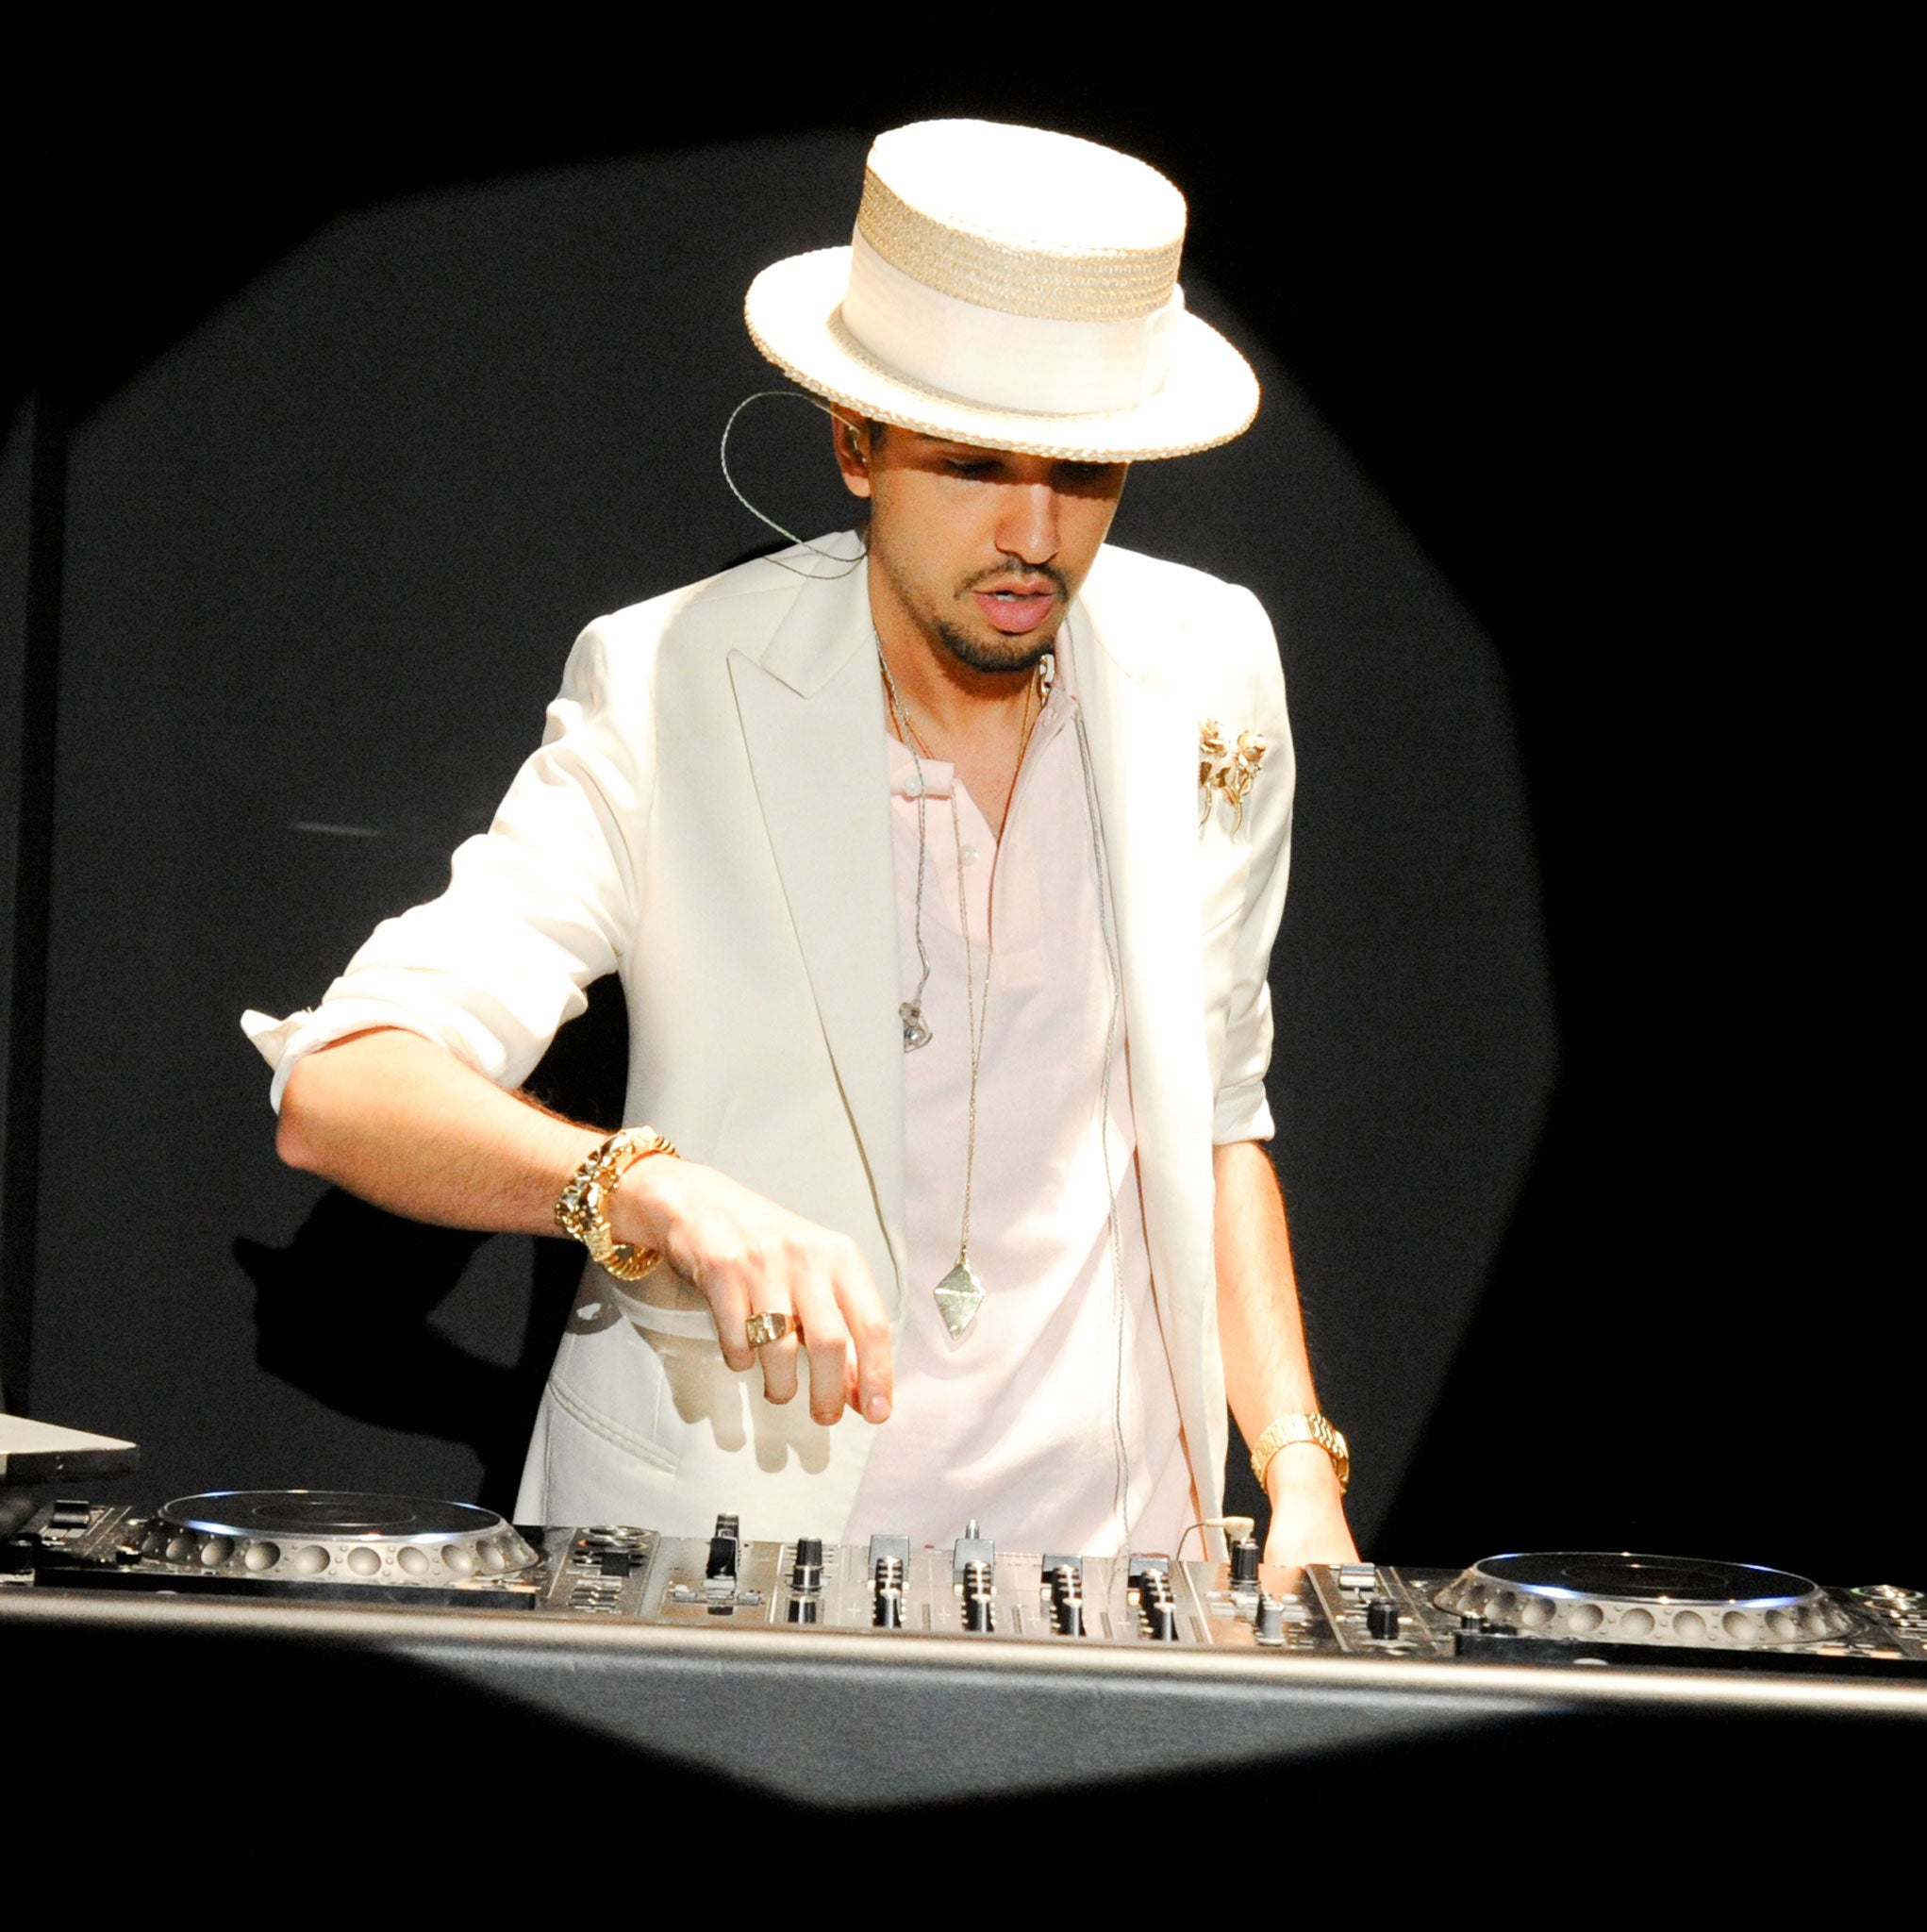 In vogue: DJ Cassidy at New York Fashion Week in 2012